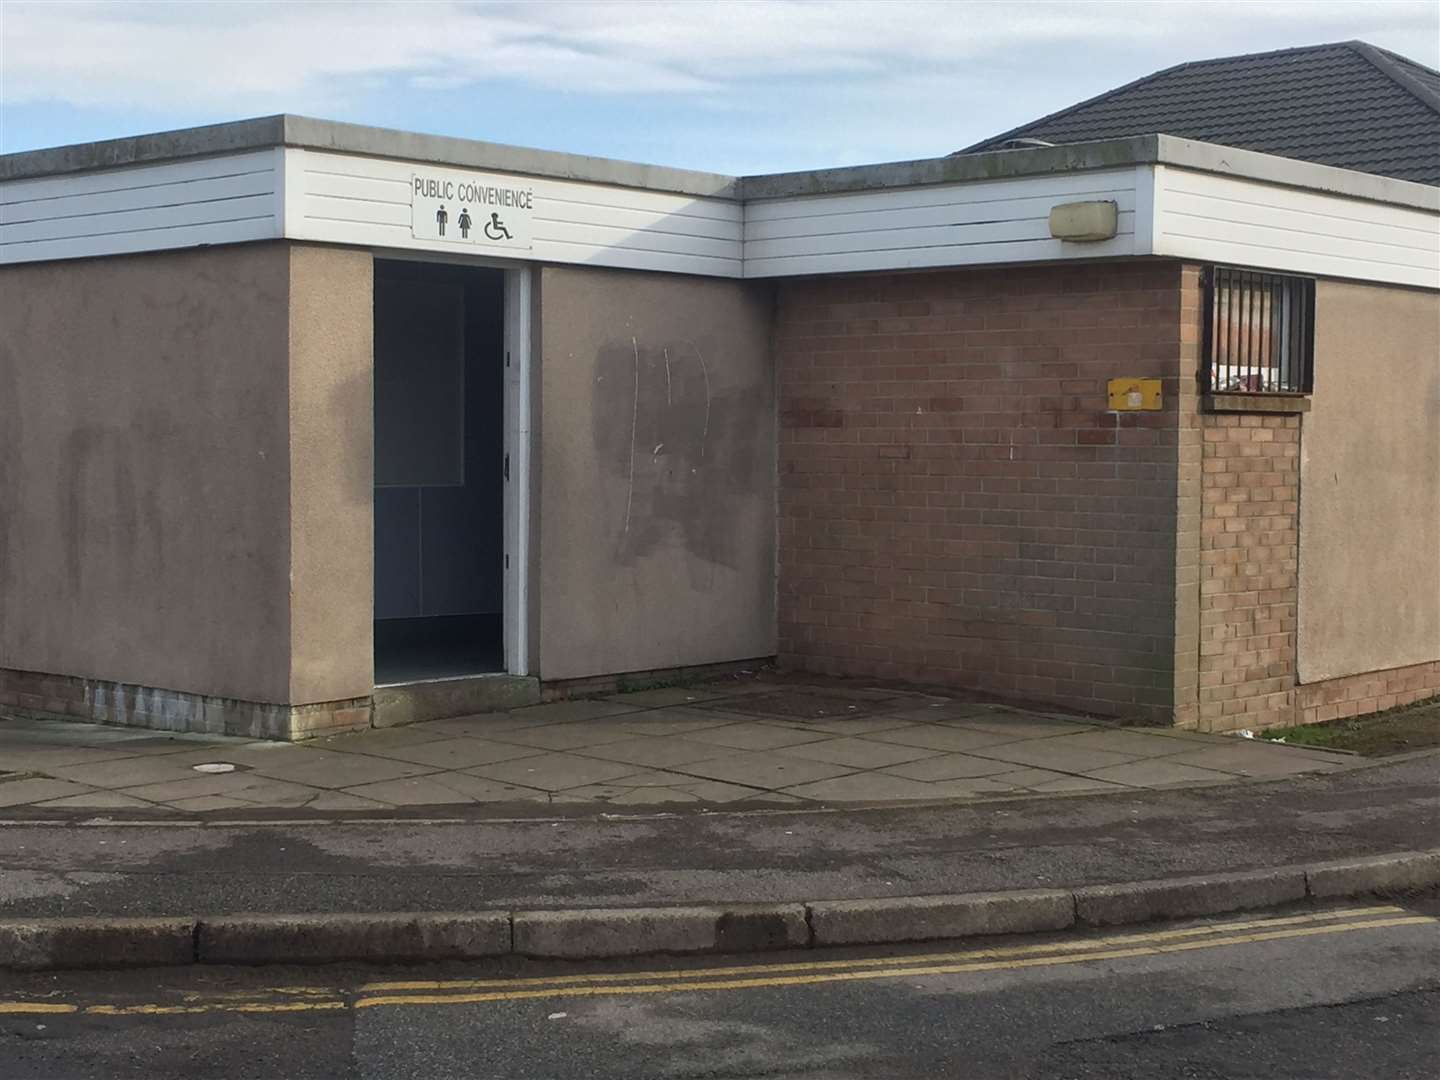 Concerns have been voiced about the opening hours of the public toilets at Newlands Lane in buckie as well as general public toilet provision.